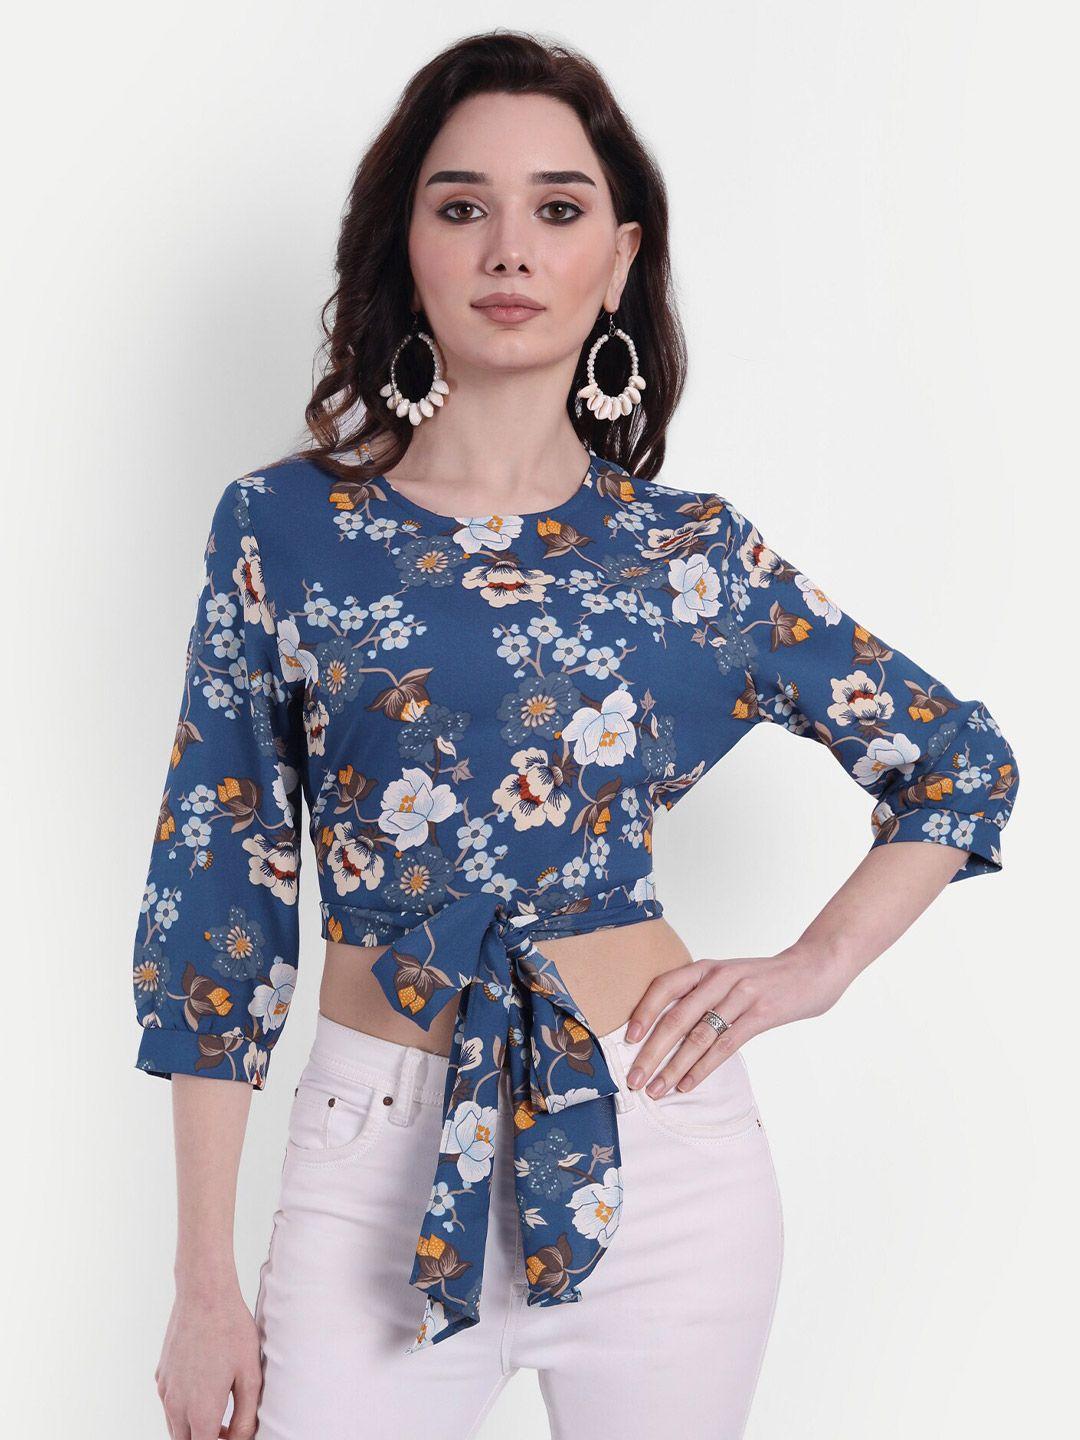 rediscover fashion navy blue floral print top